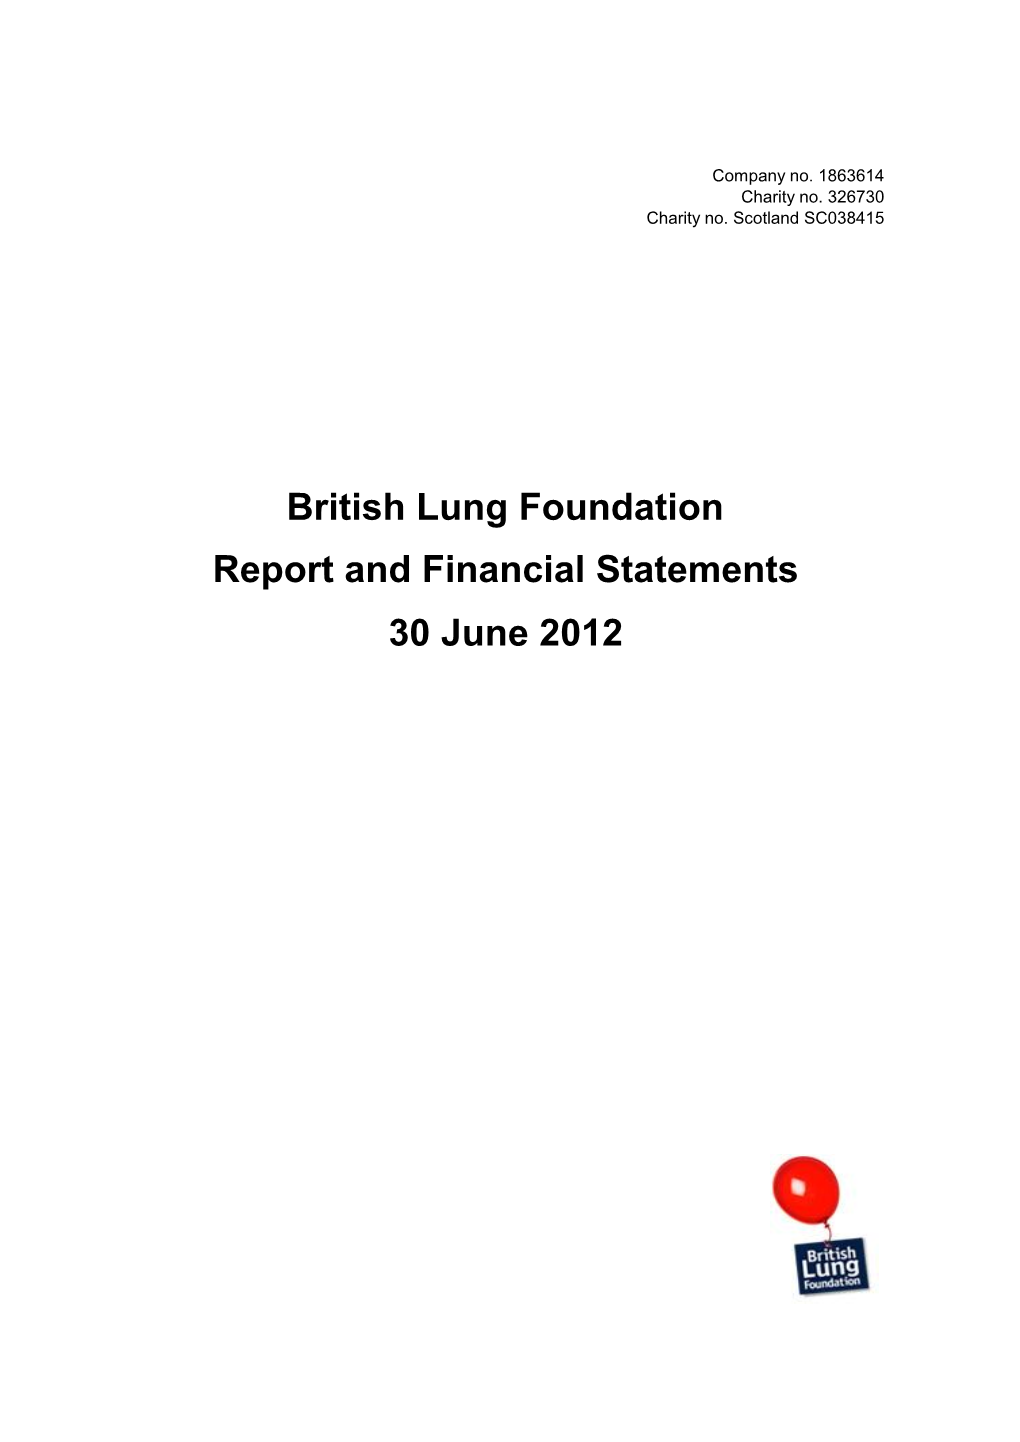 British Lung Foundation Report and Financial Statements 30 June 2012 British Lung Foundation